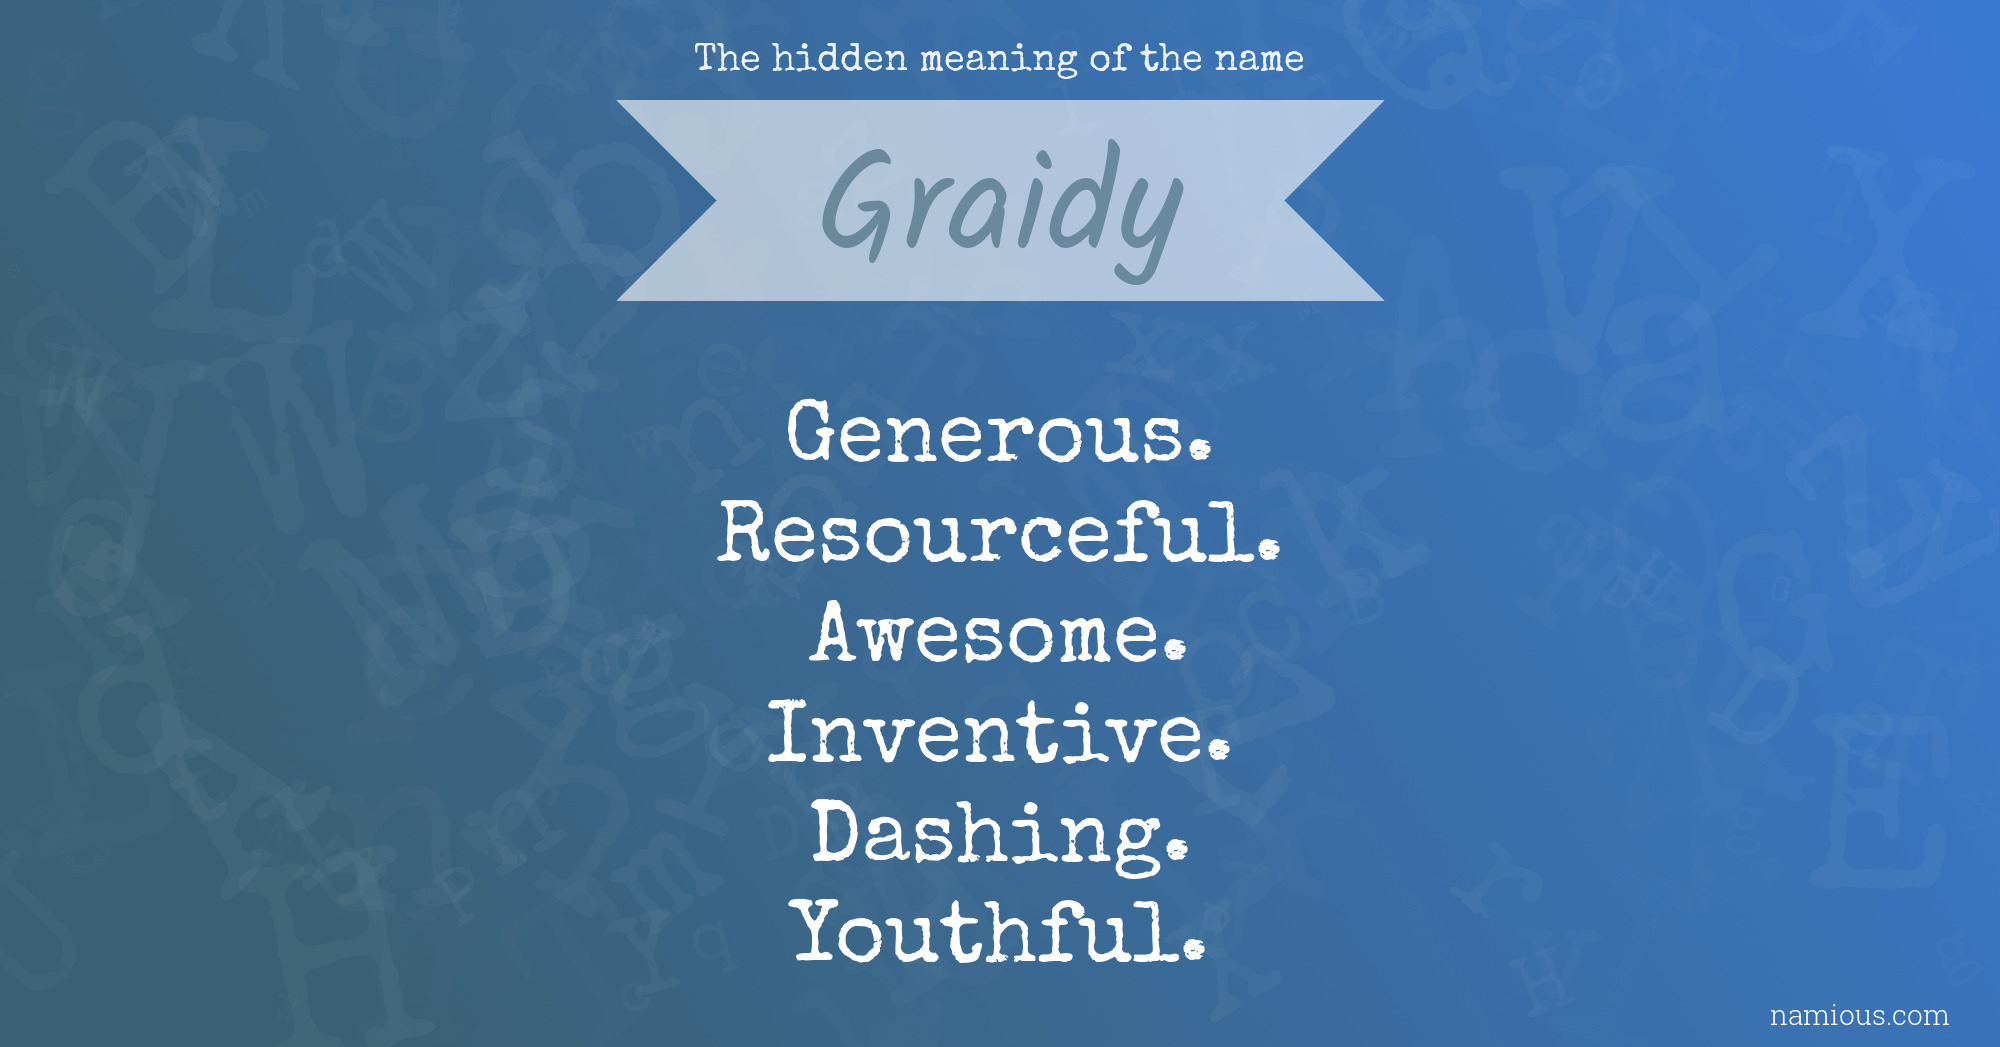 The hidden meaning of the name Graidy